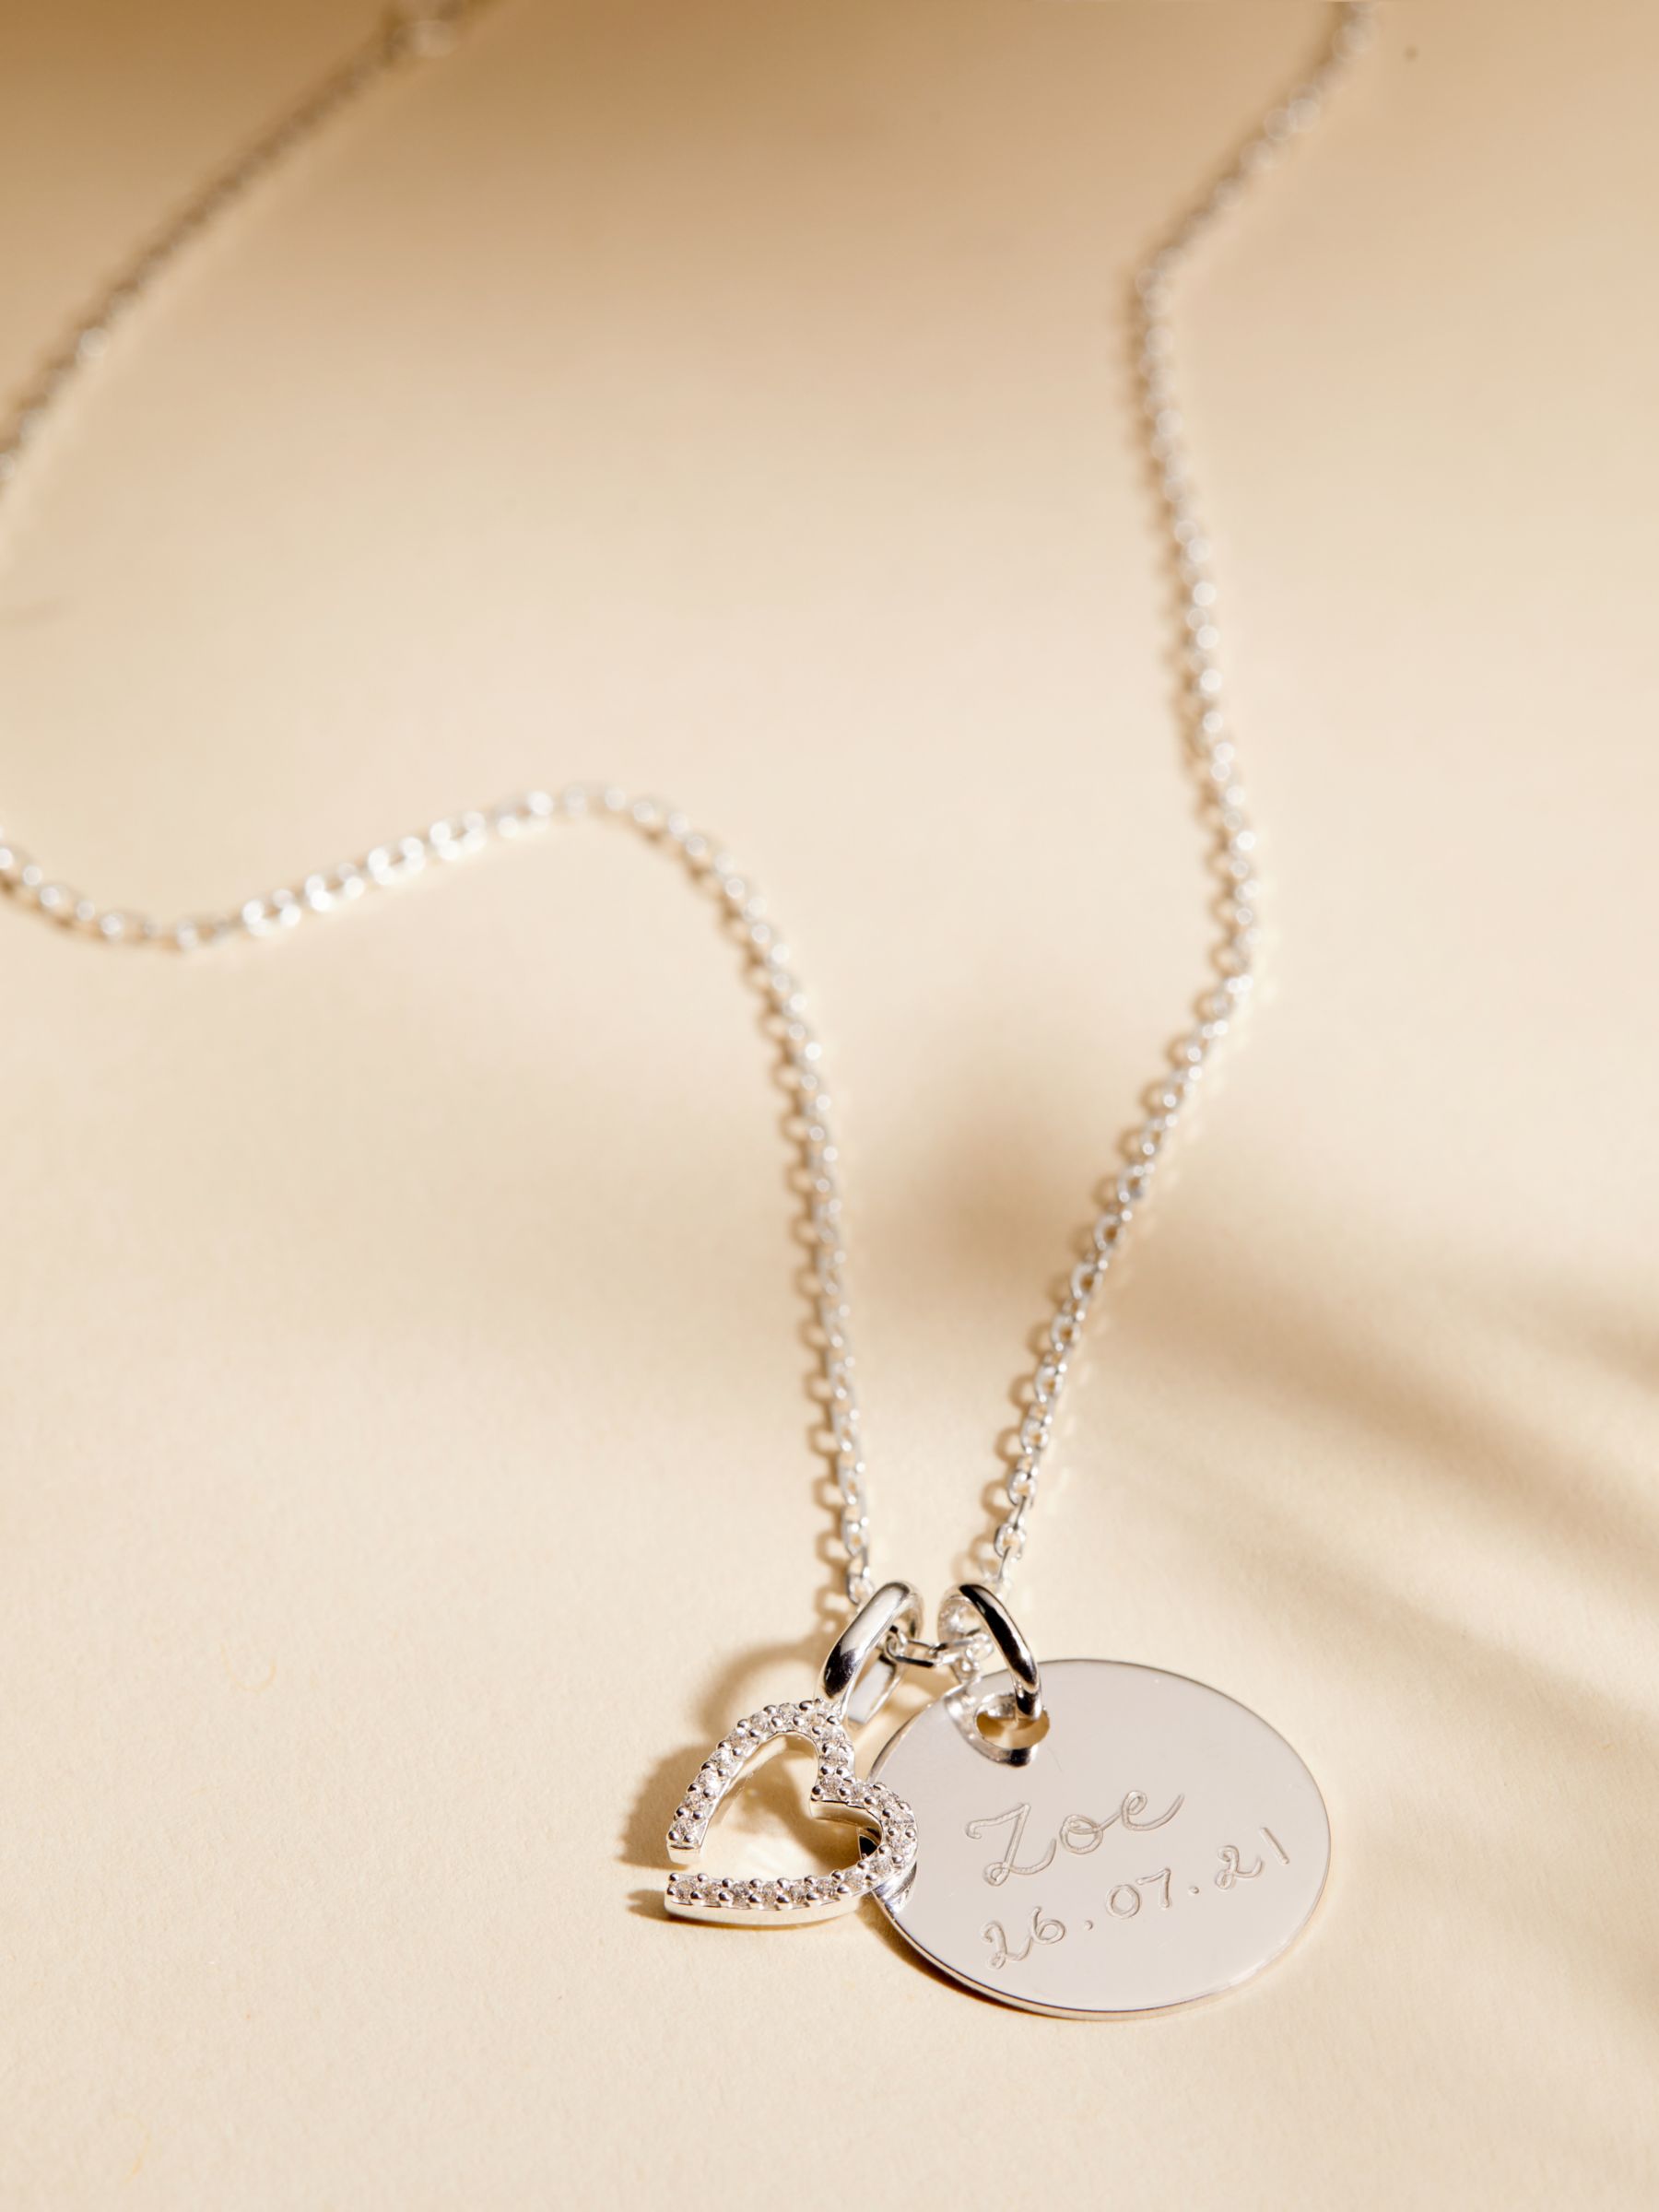 Buy Merci Maman Personalised Disc & Crystal Heart Charm Pendant Necklace Online at johnlewis.com